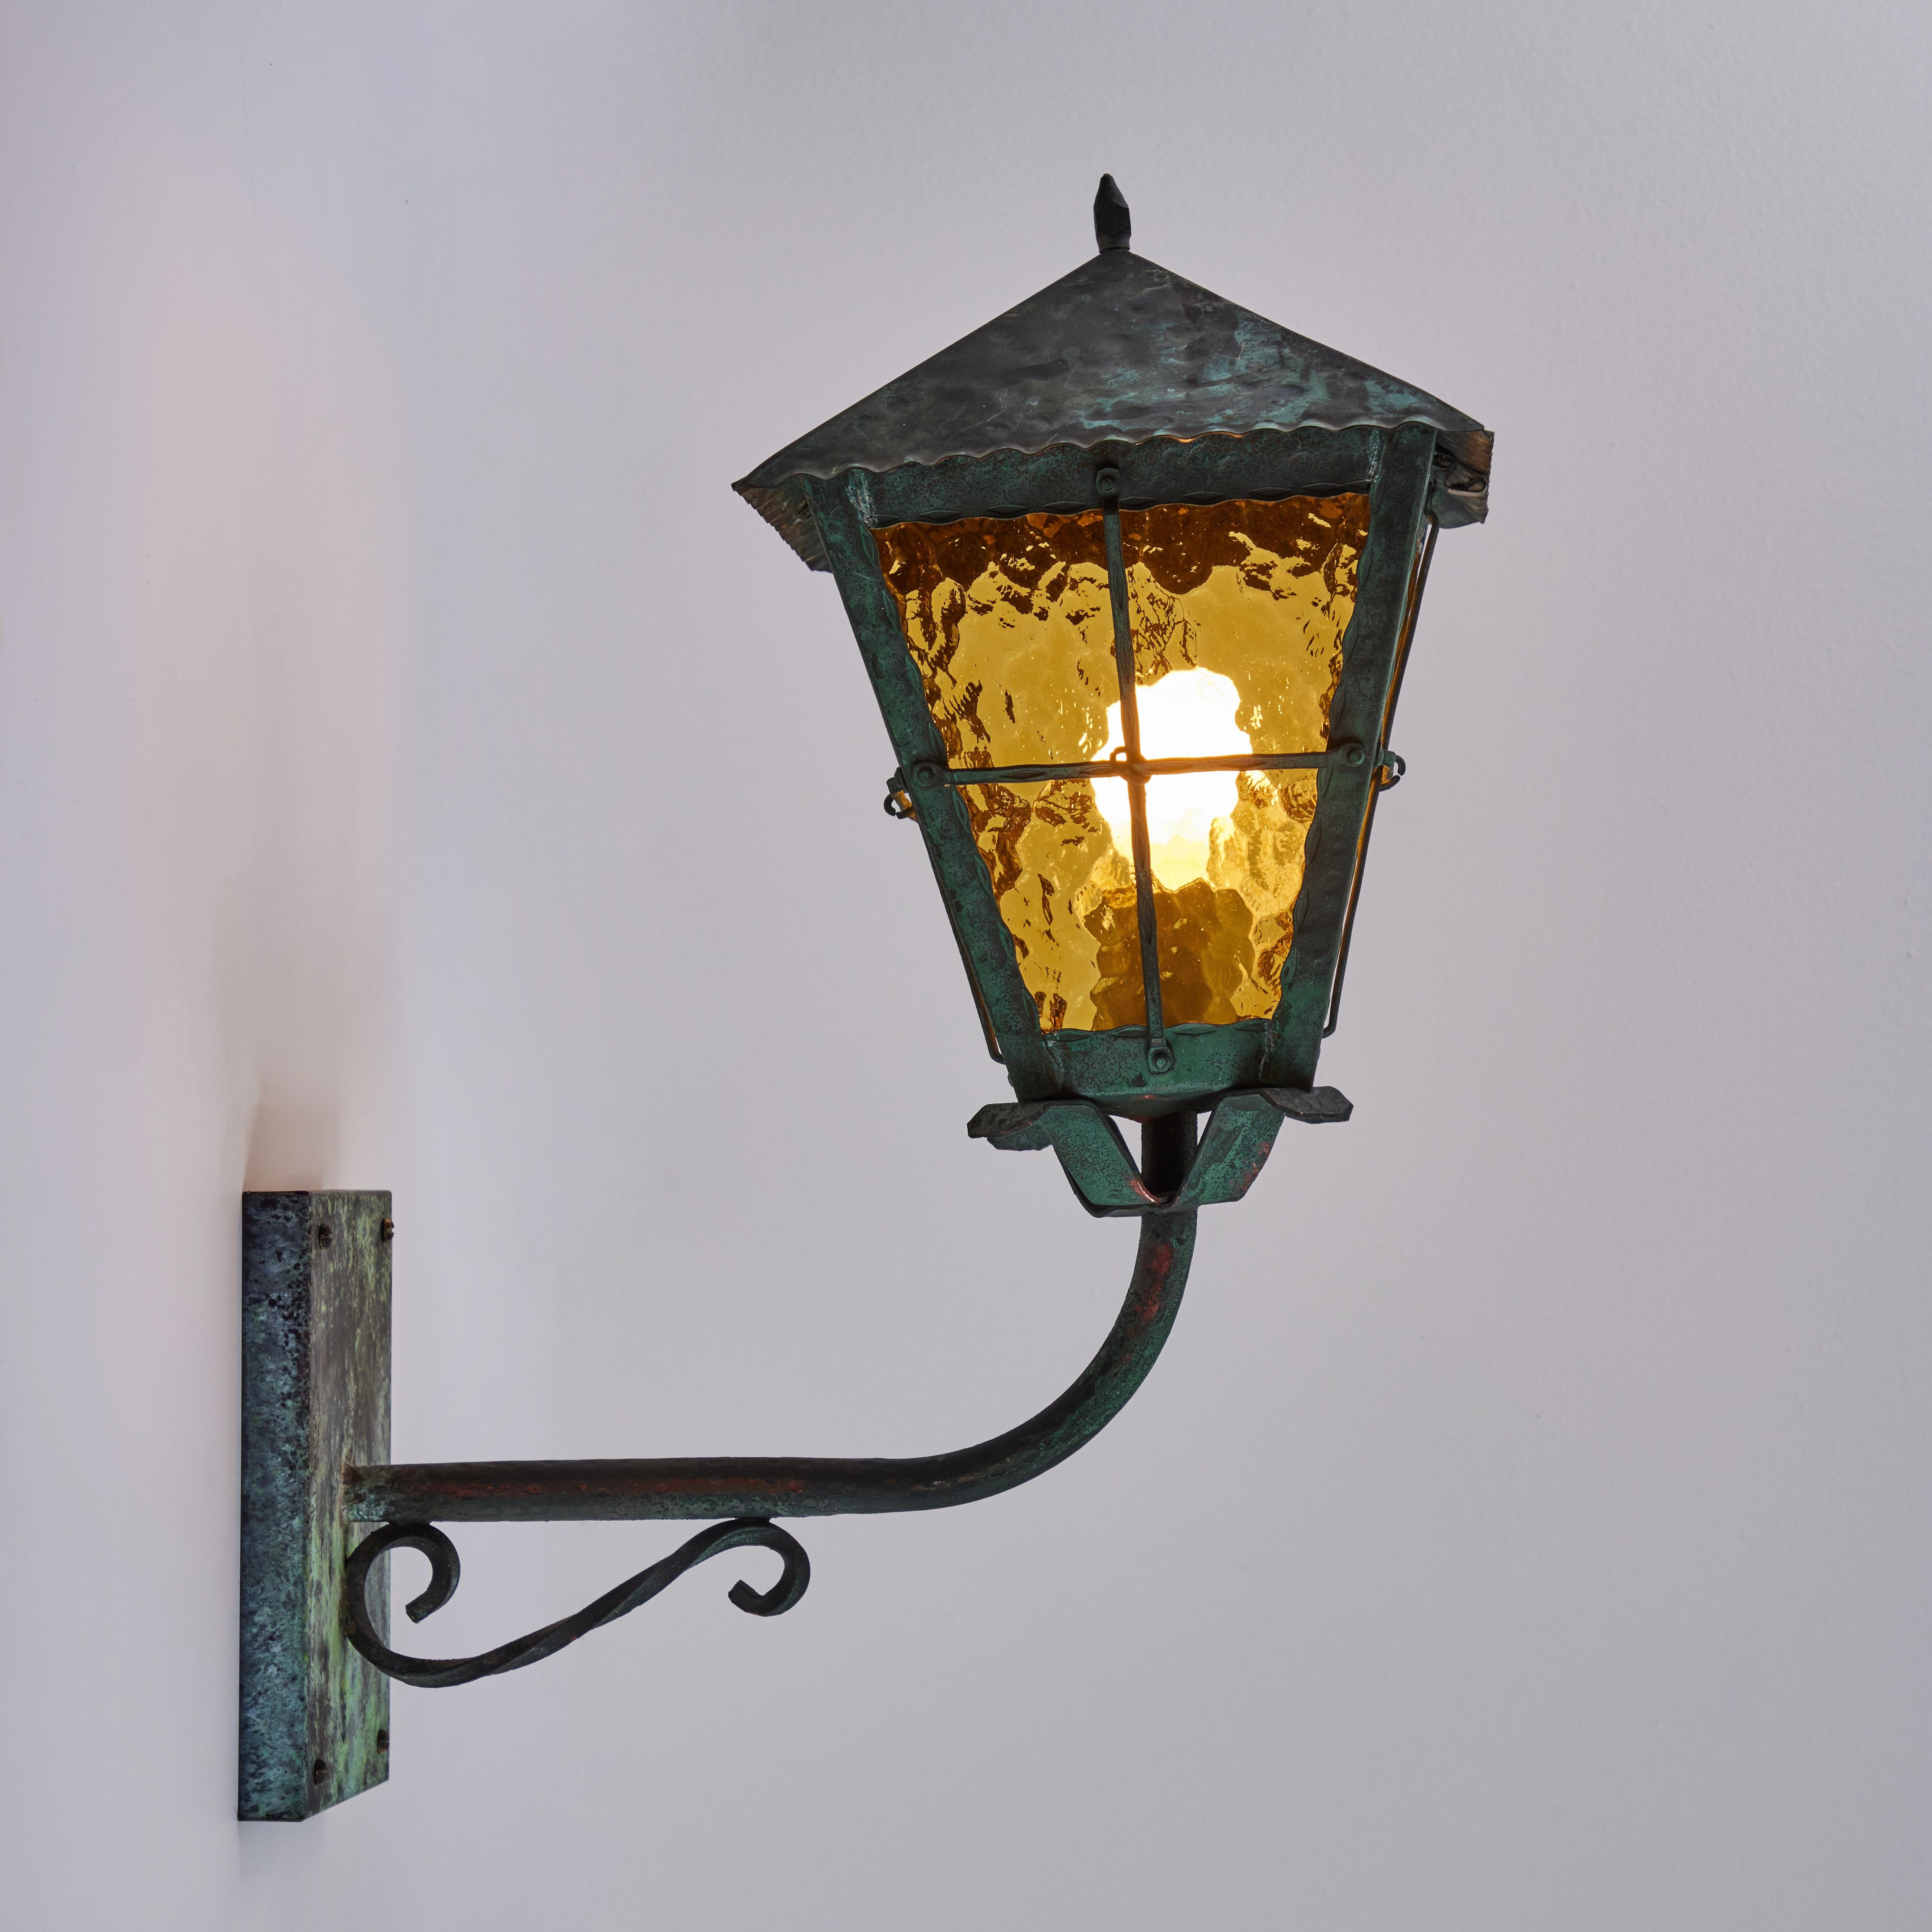 1950s Large Scandinavian Outdoor Wall Light in Patinated Copper and Amber Glass For Sale 3